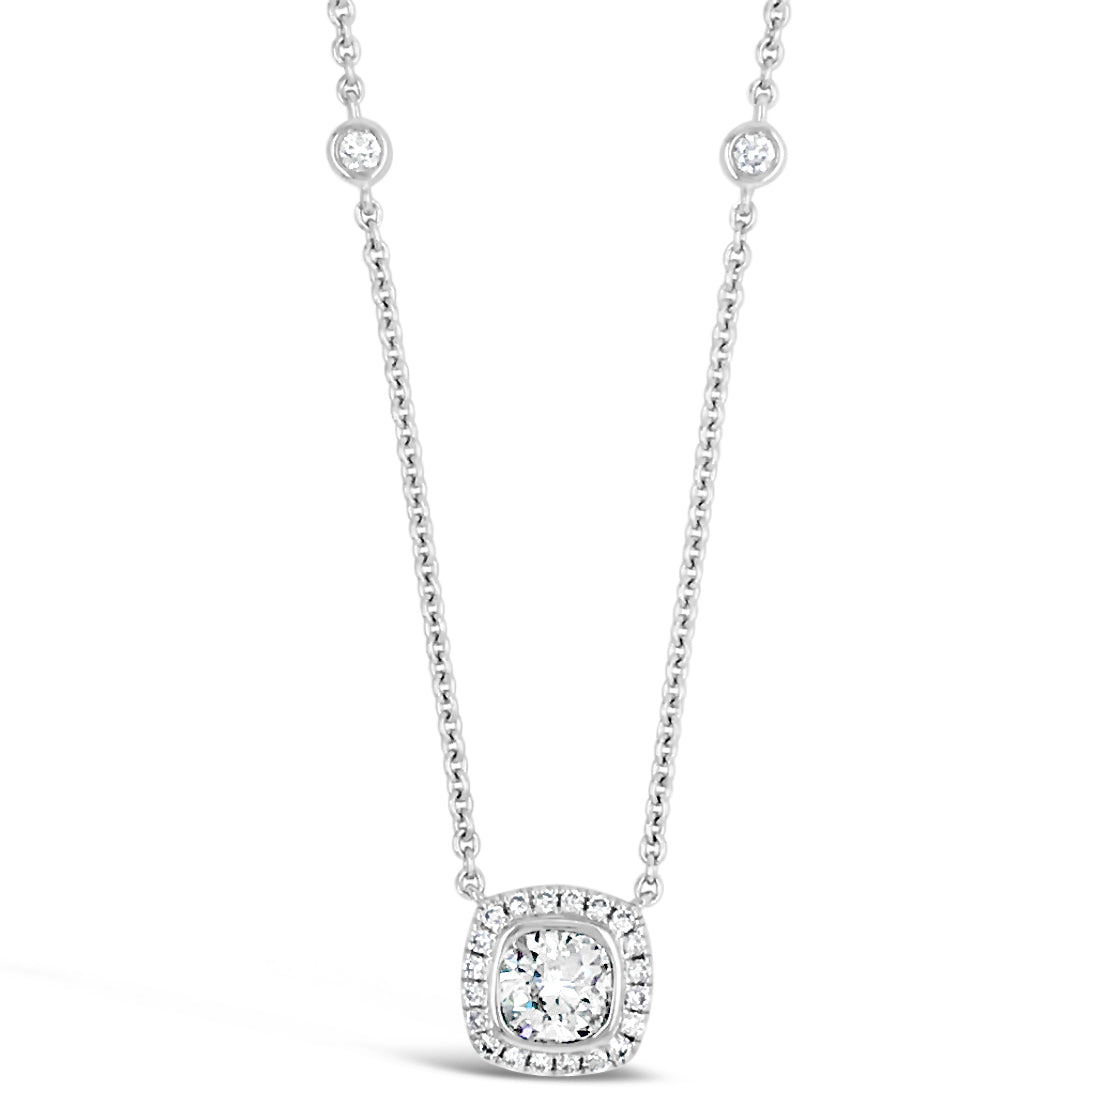 Cushion Diamond Pendant Necklace with Bezel-Set Diamond Chain -18K gold weighing 4.00 grams -24 round pave set diamonds totaling 0.20 carats -1 cushion-cut diamond weighing 0.56 carats (I color, I1 clarity)